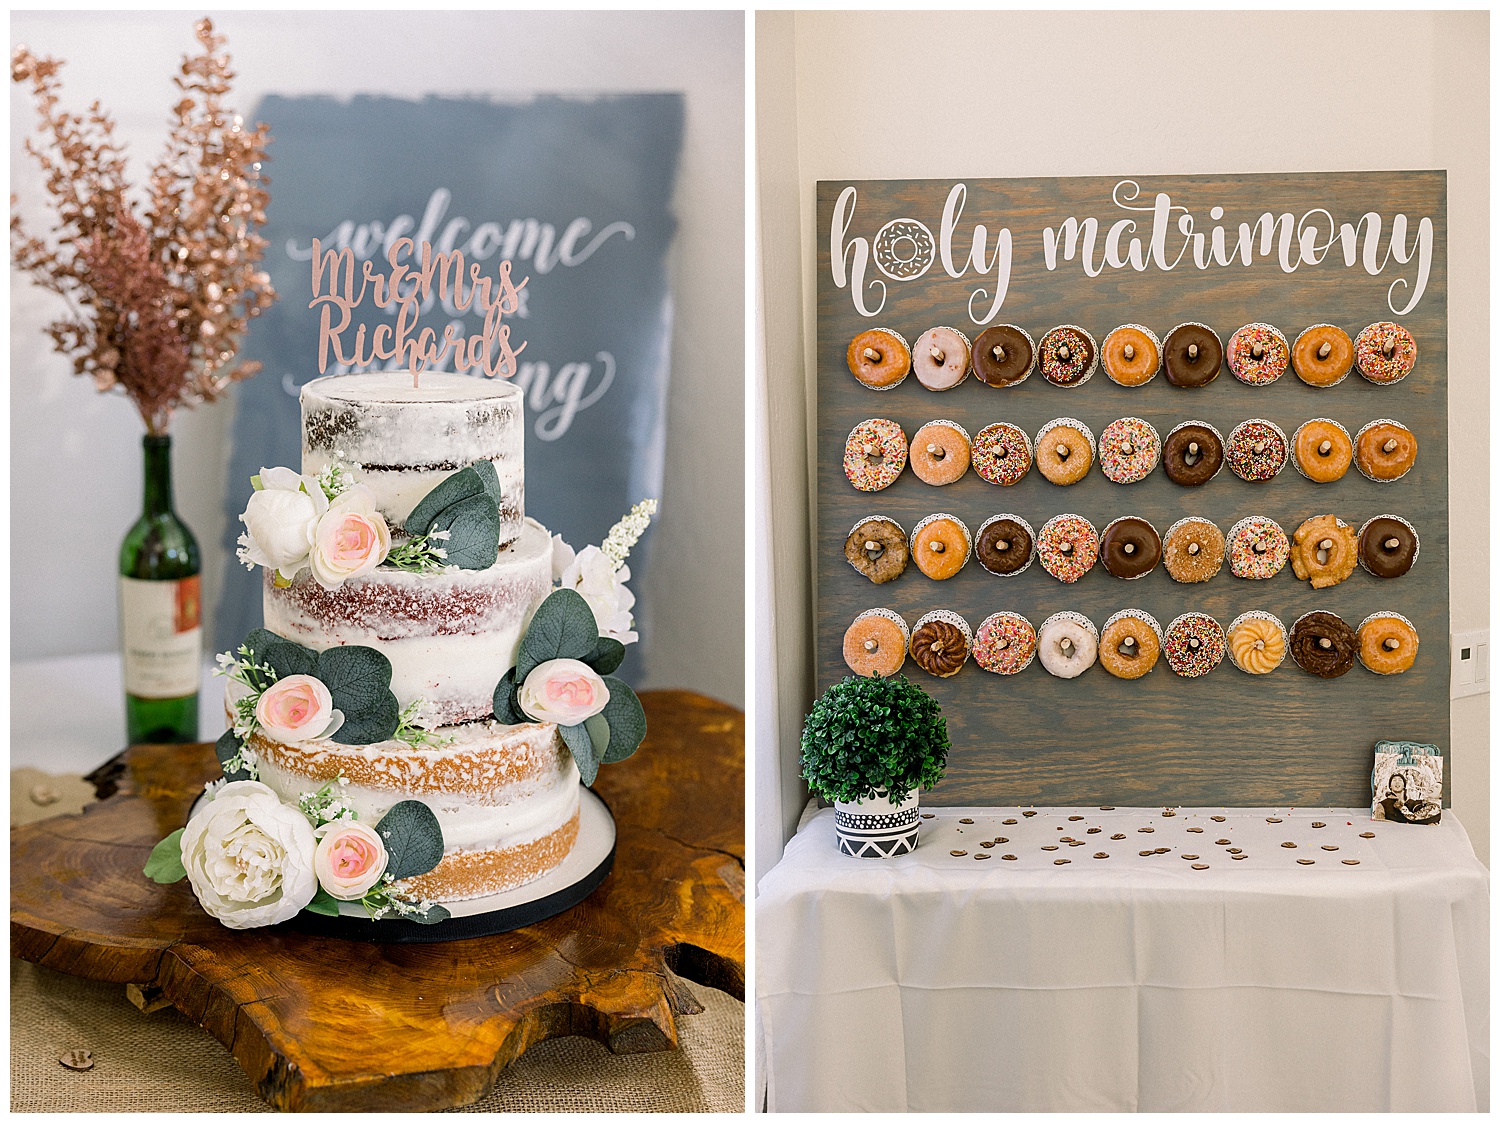 Lets kiss and cake up wedding cake, with holy matrimony donut wall